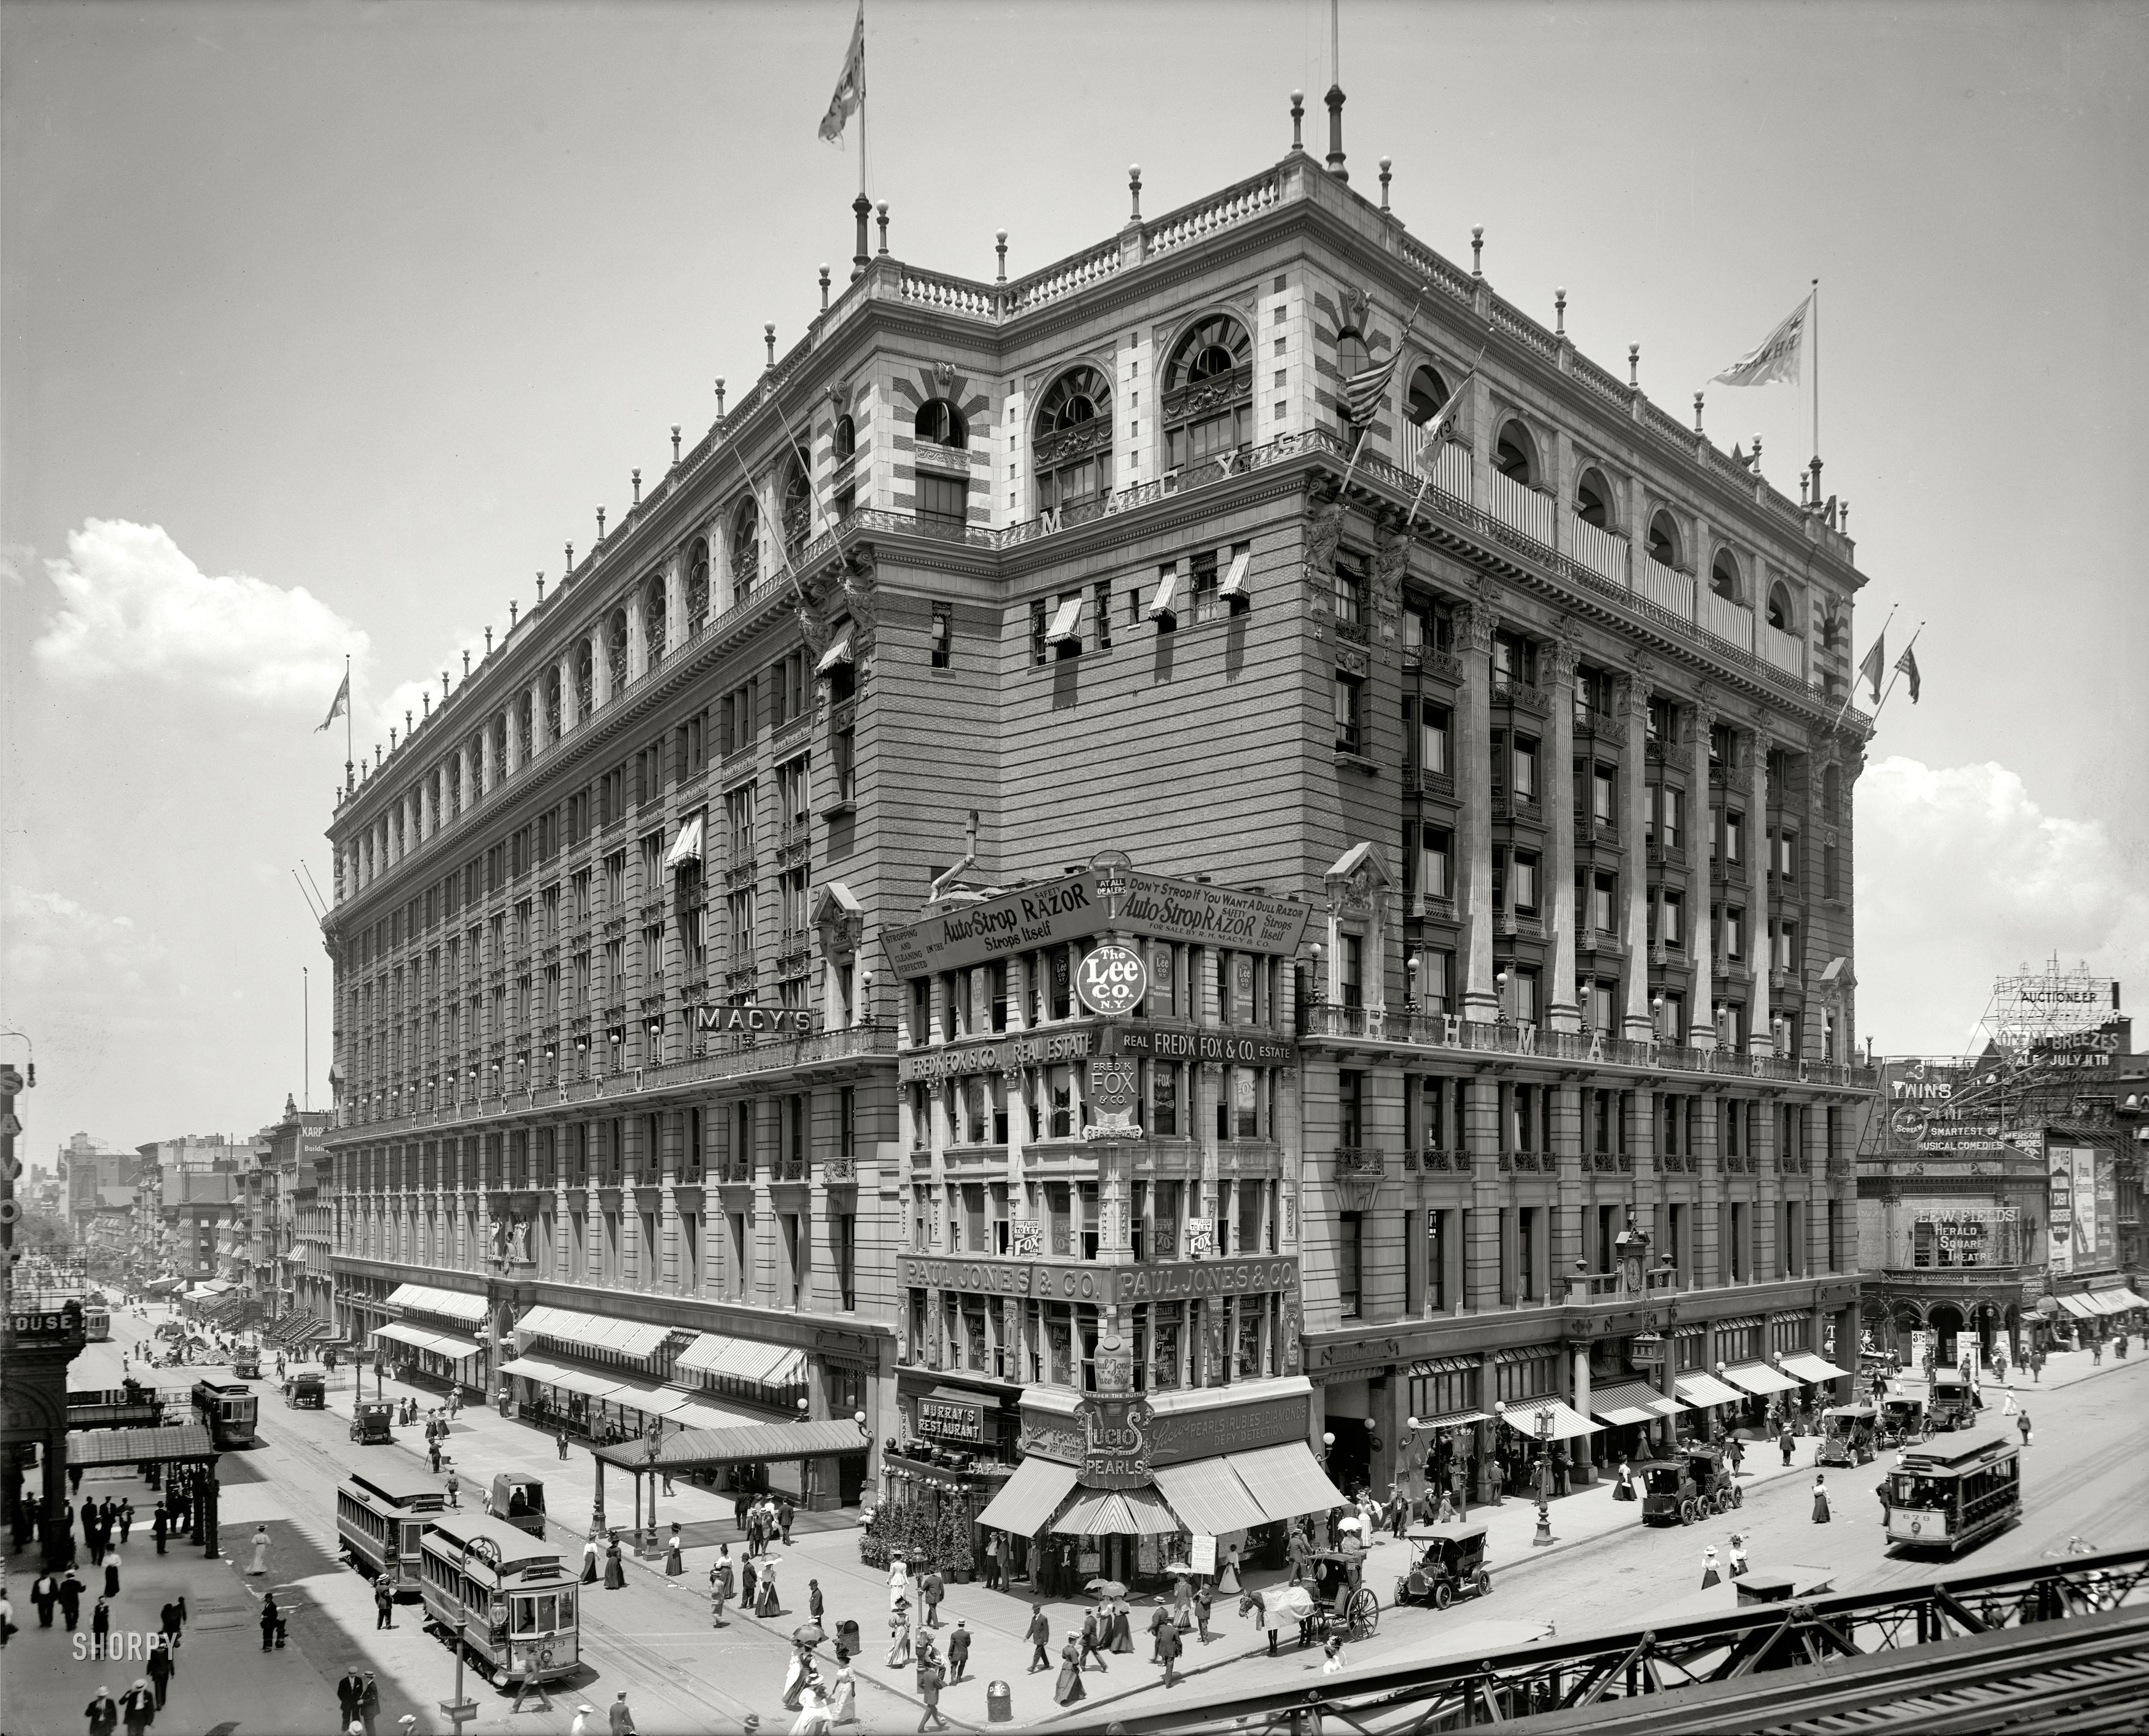 New York circa 1908. "R.H. Macy & Co., Herald Square." Broadway at 34th Street, with a glimpse of the Sixth Avenue  elevated tracks. Other Shorpy landmarks include Lucio's Pearls and a couple of the electric hansom cabs seen in a previous post. 8x10 inch glass negative, Detroit Publishing. View full size.